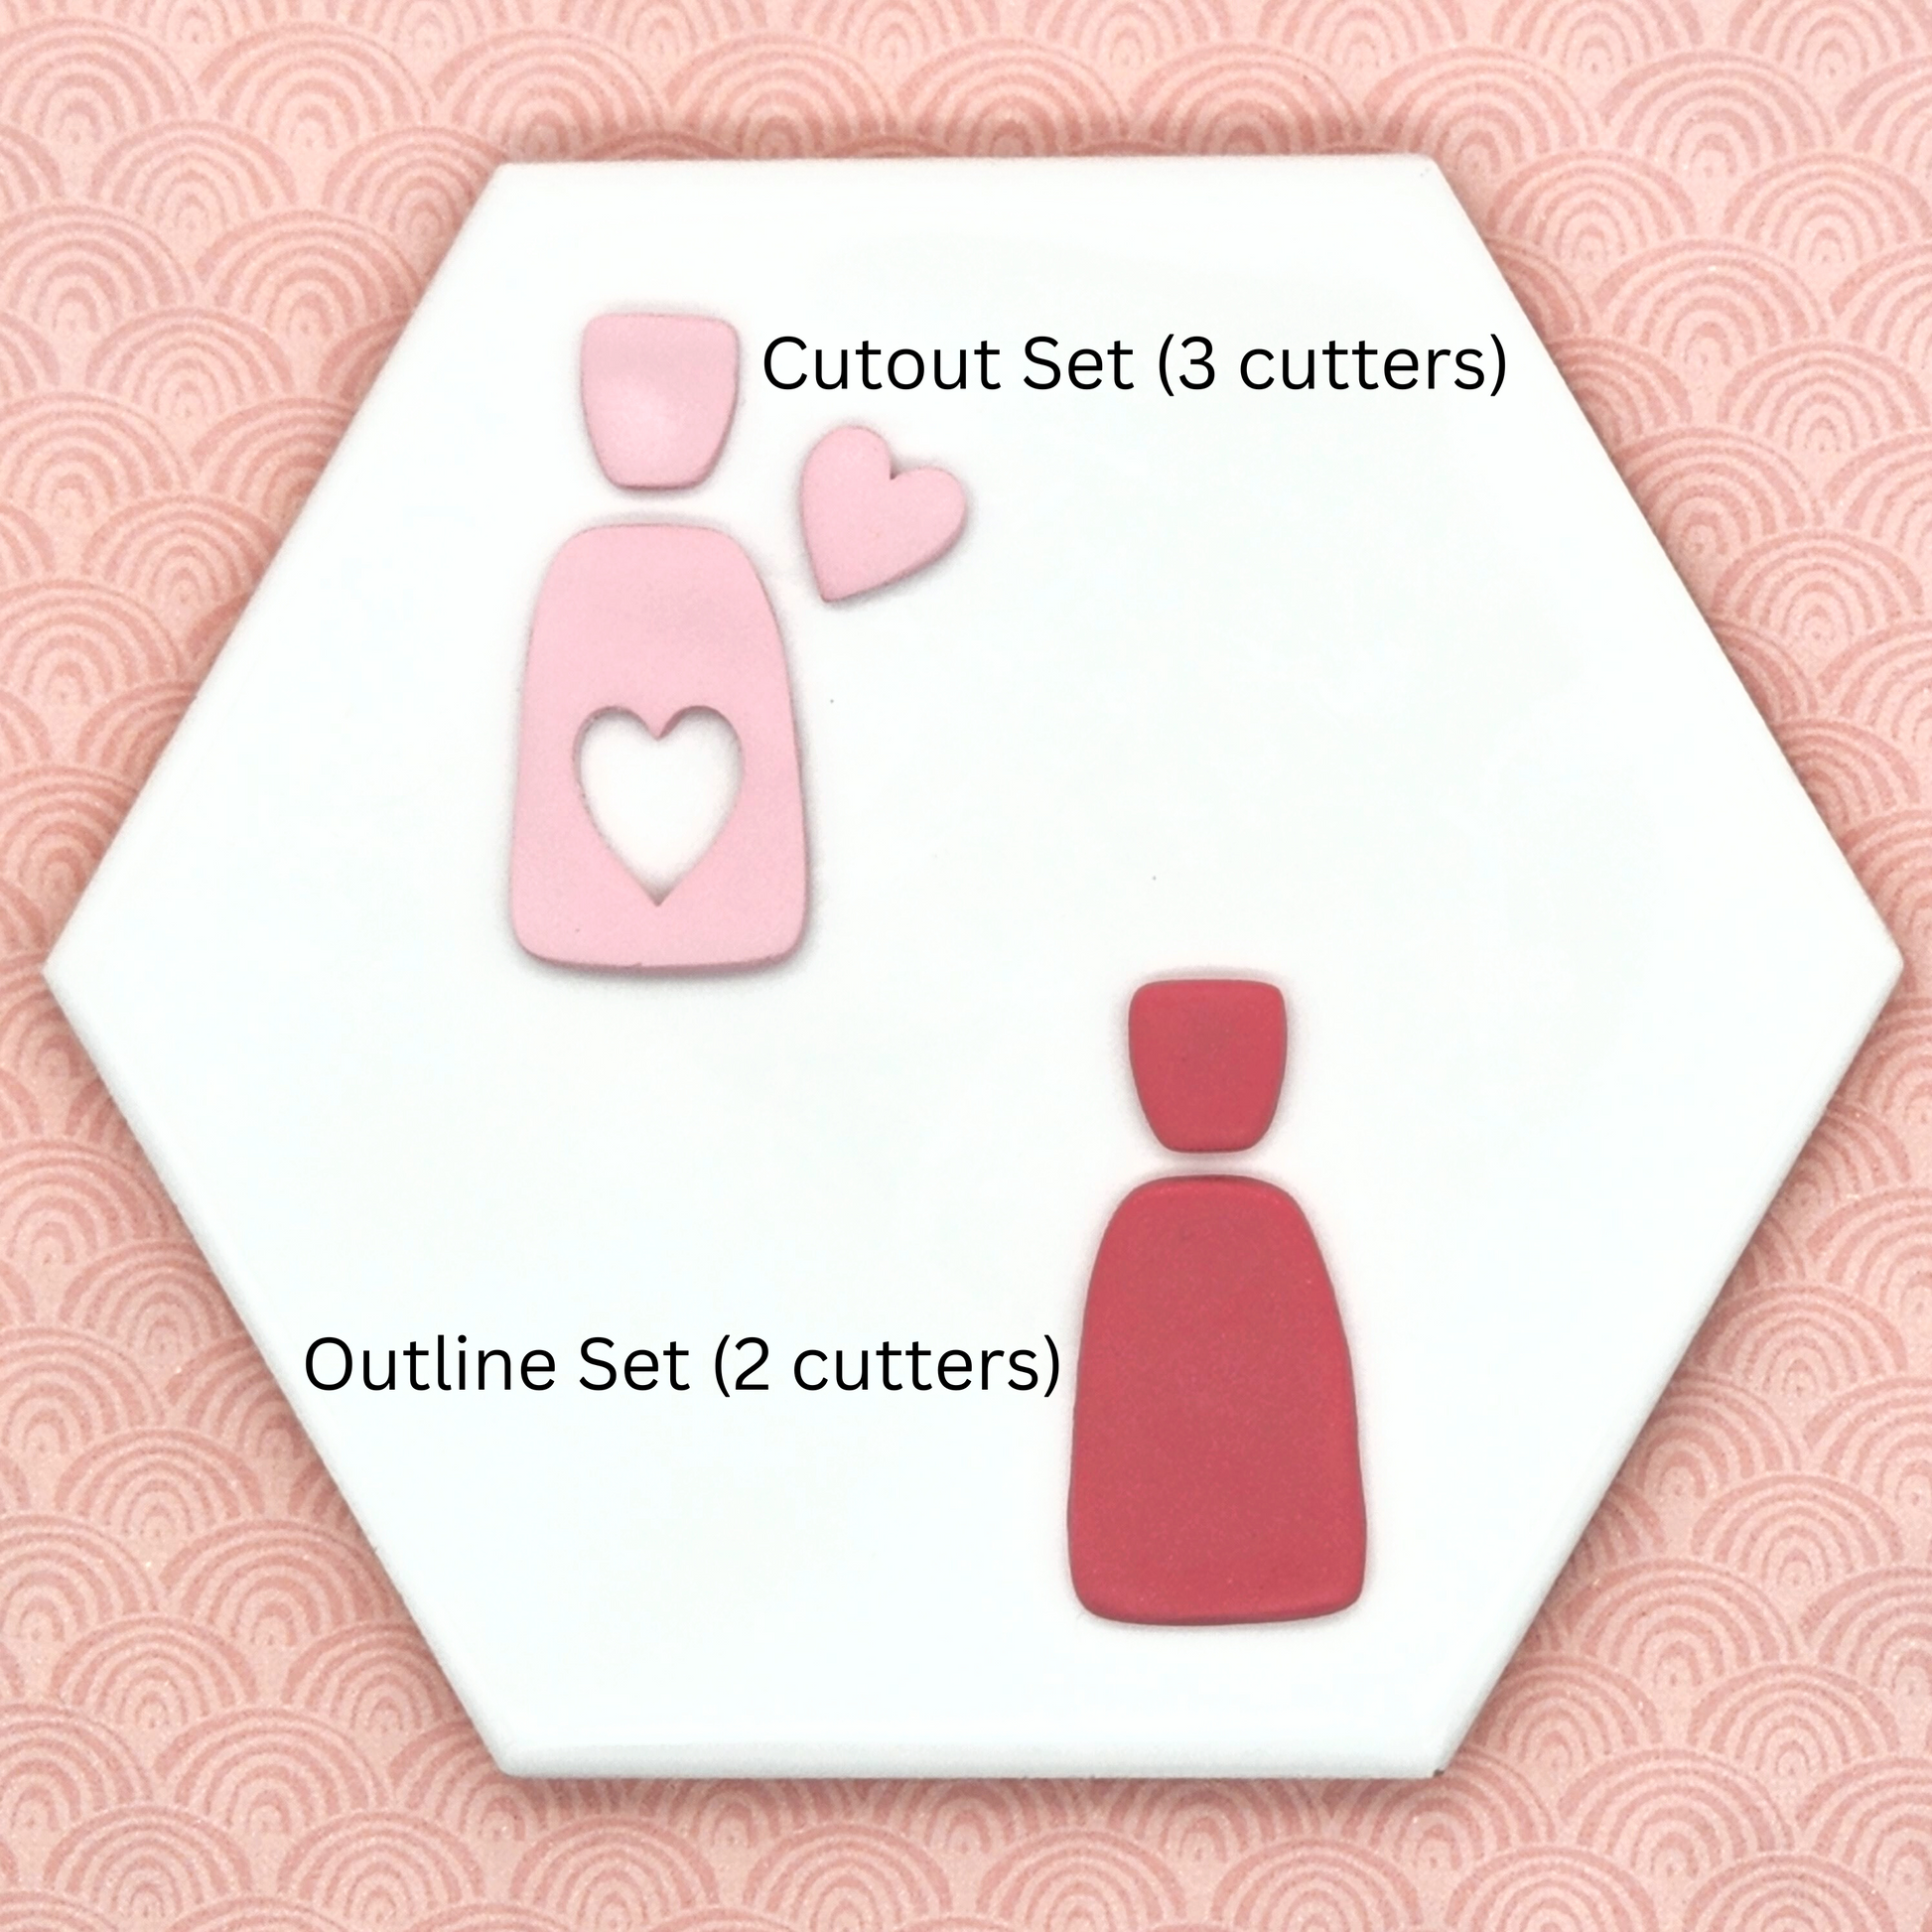 Shows comparison of Amara set's outline and cutout set sample in polymer clay. outline set: two piece shape cutters including stud and dangle, and cutout set: three piece set cutters including stud, dangle and heart shaped cutter